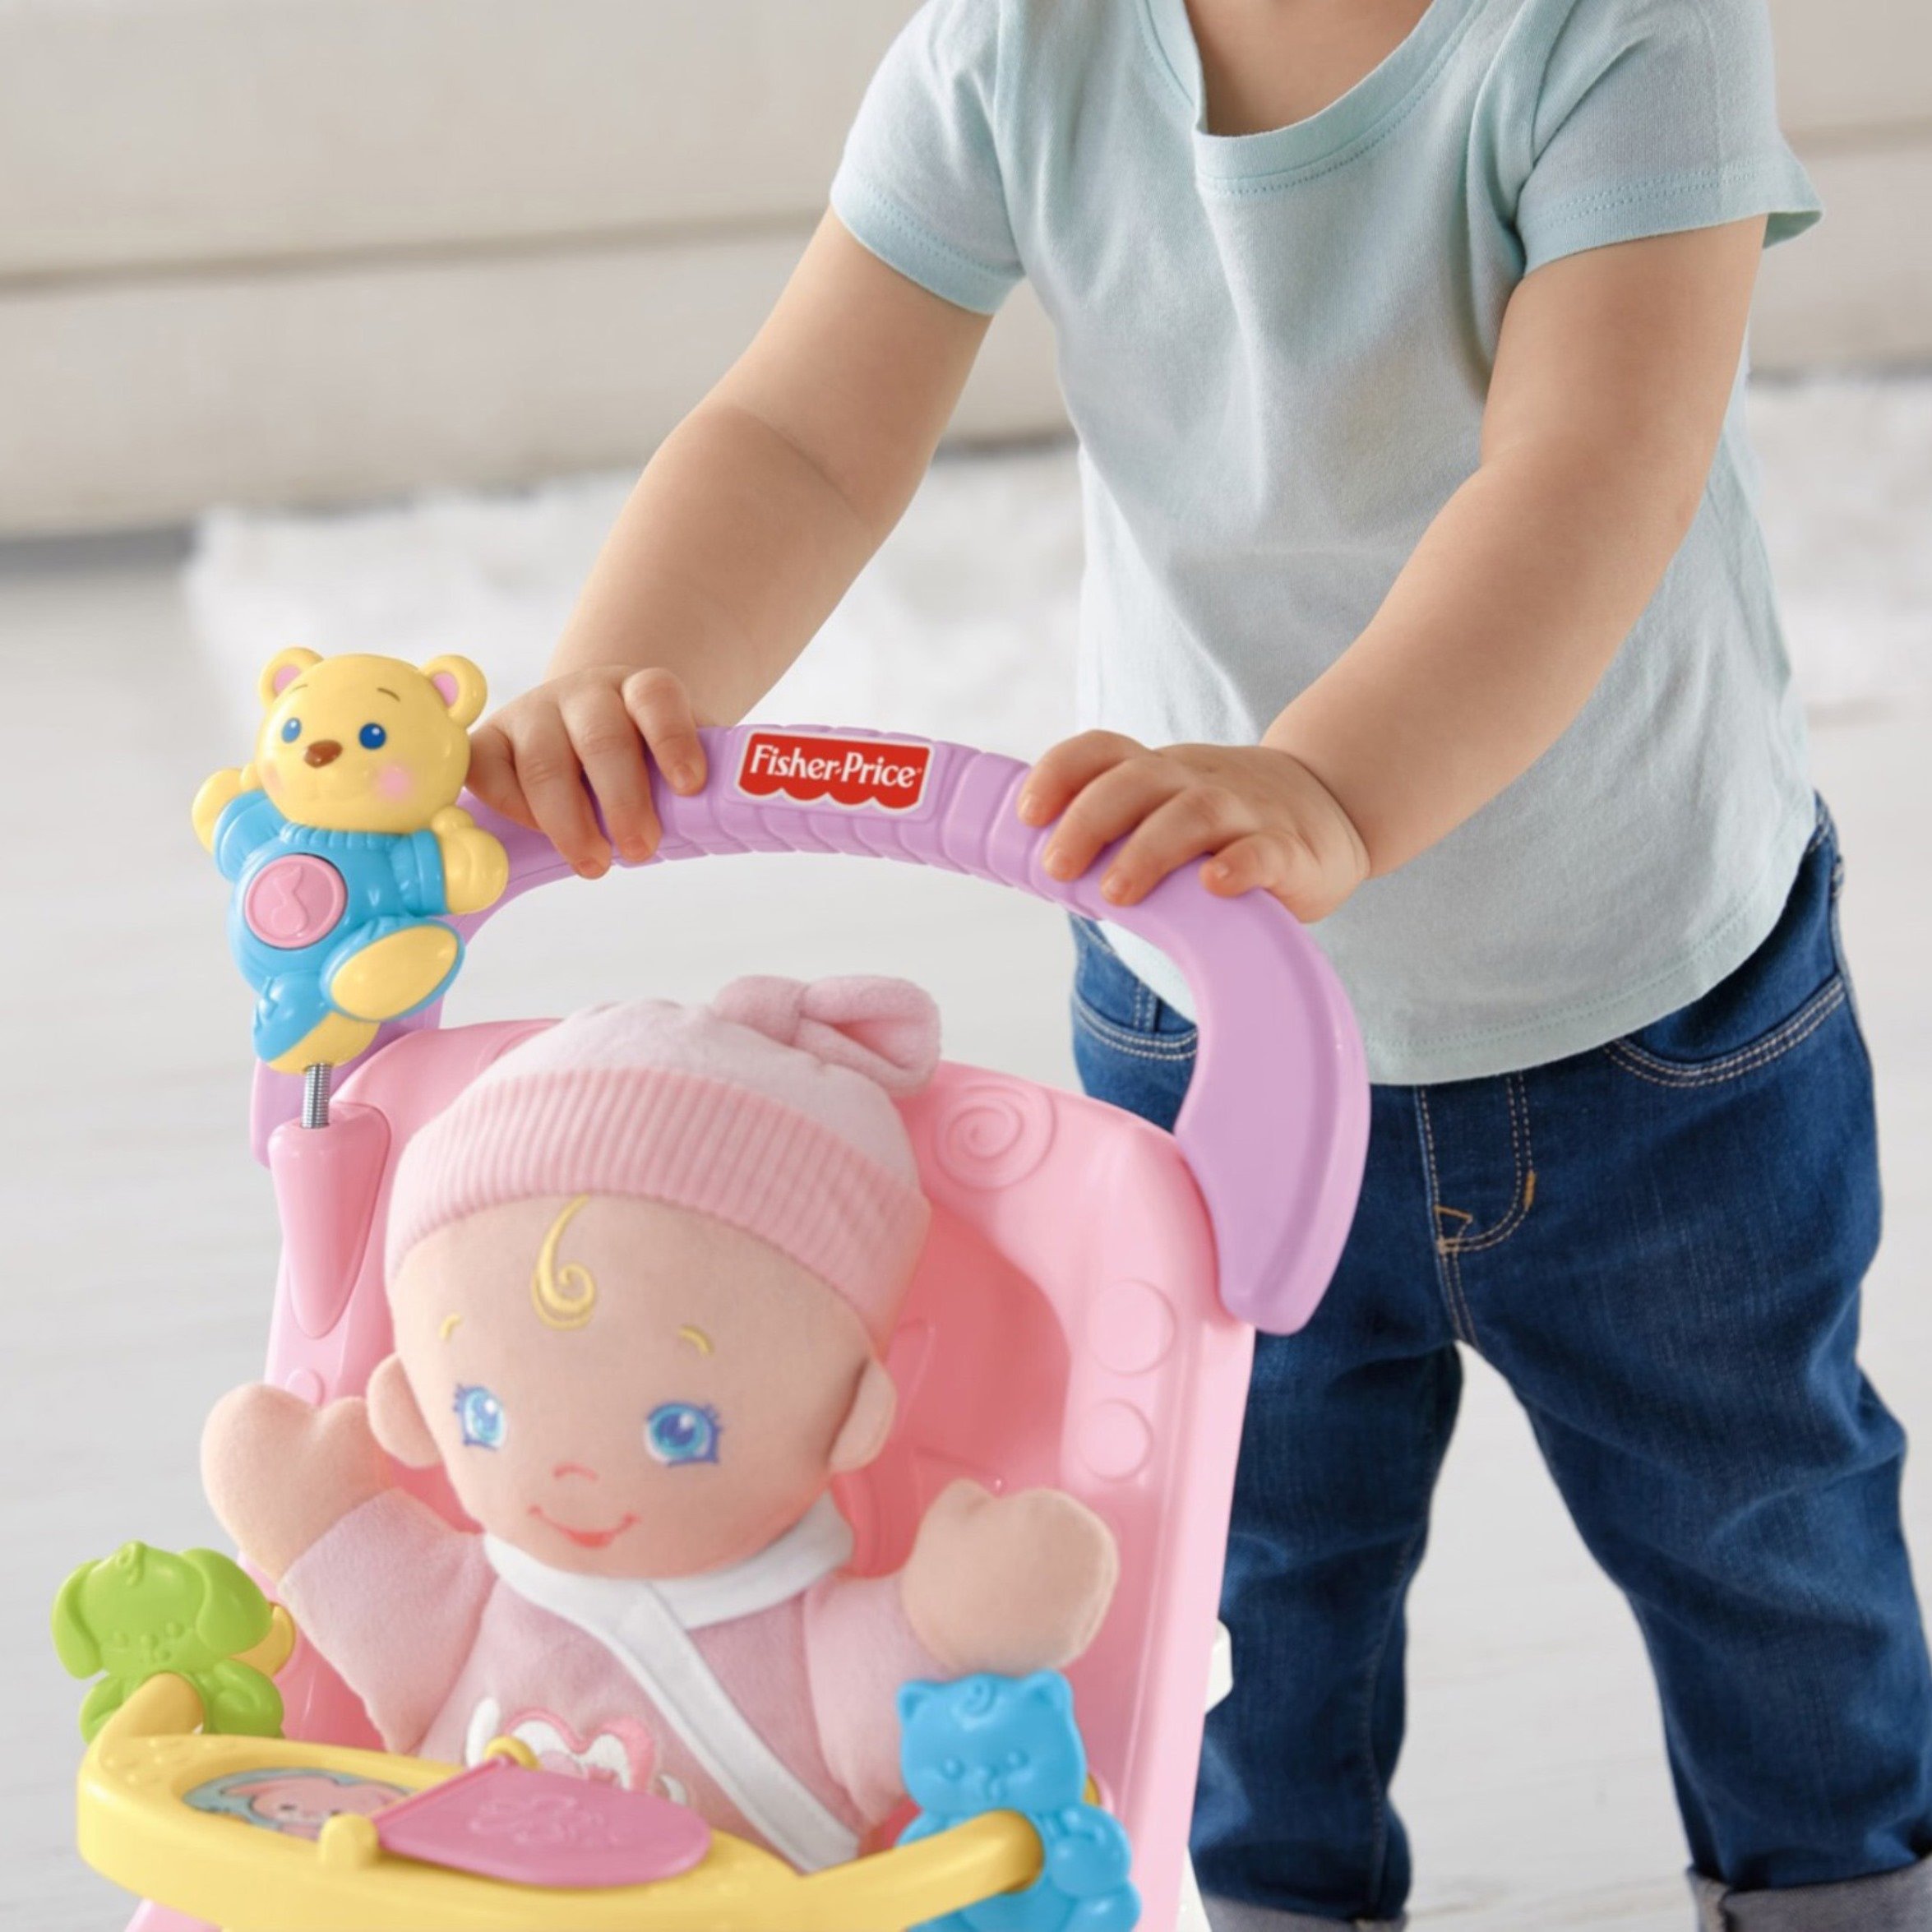 Fisher-Price Brilliant Basics Stroll-Along Walker, Standard Packaging, for 9 months and up